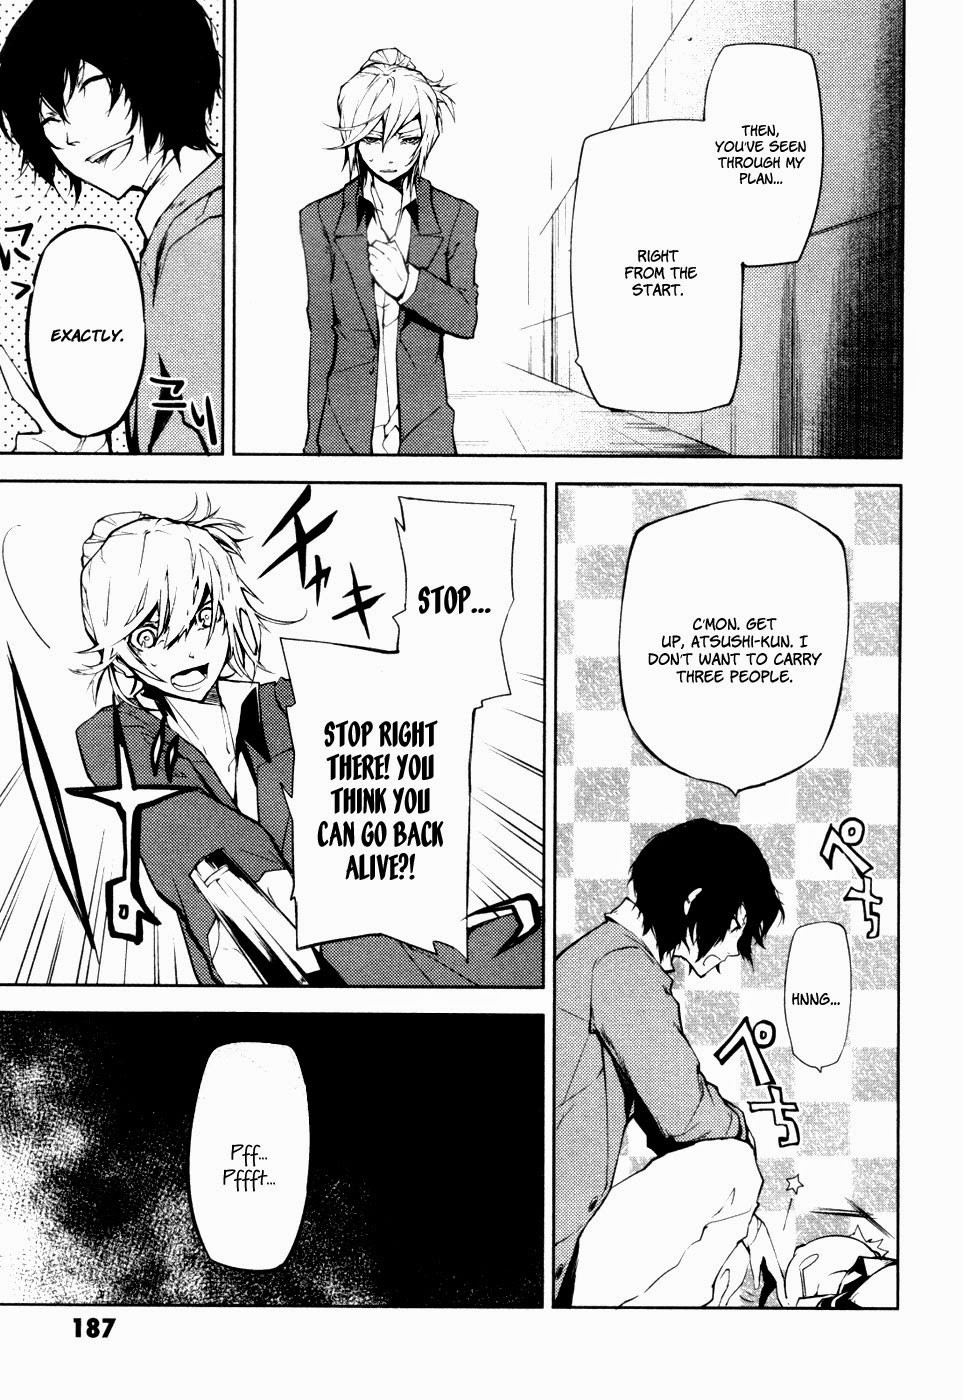 Bungo Stray Dogs chapter 4 page 46